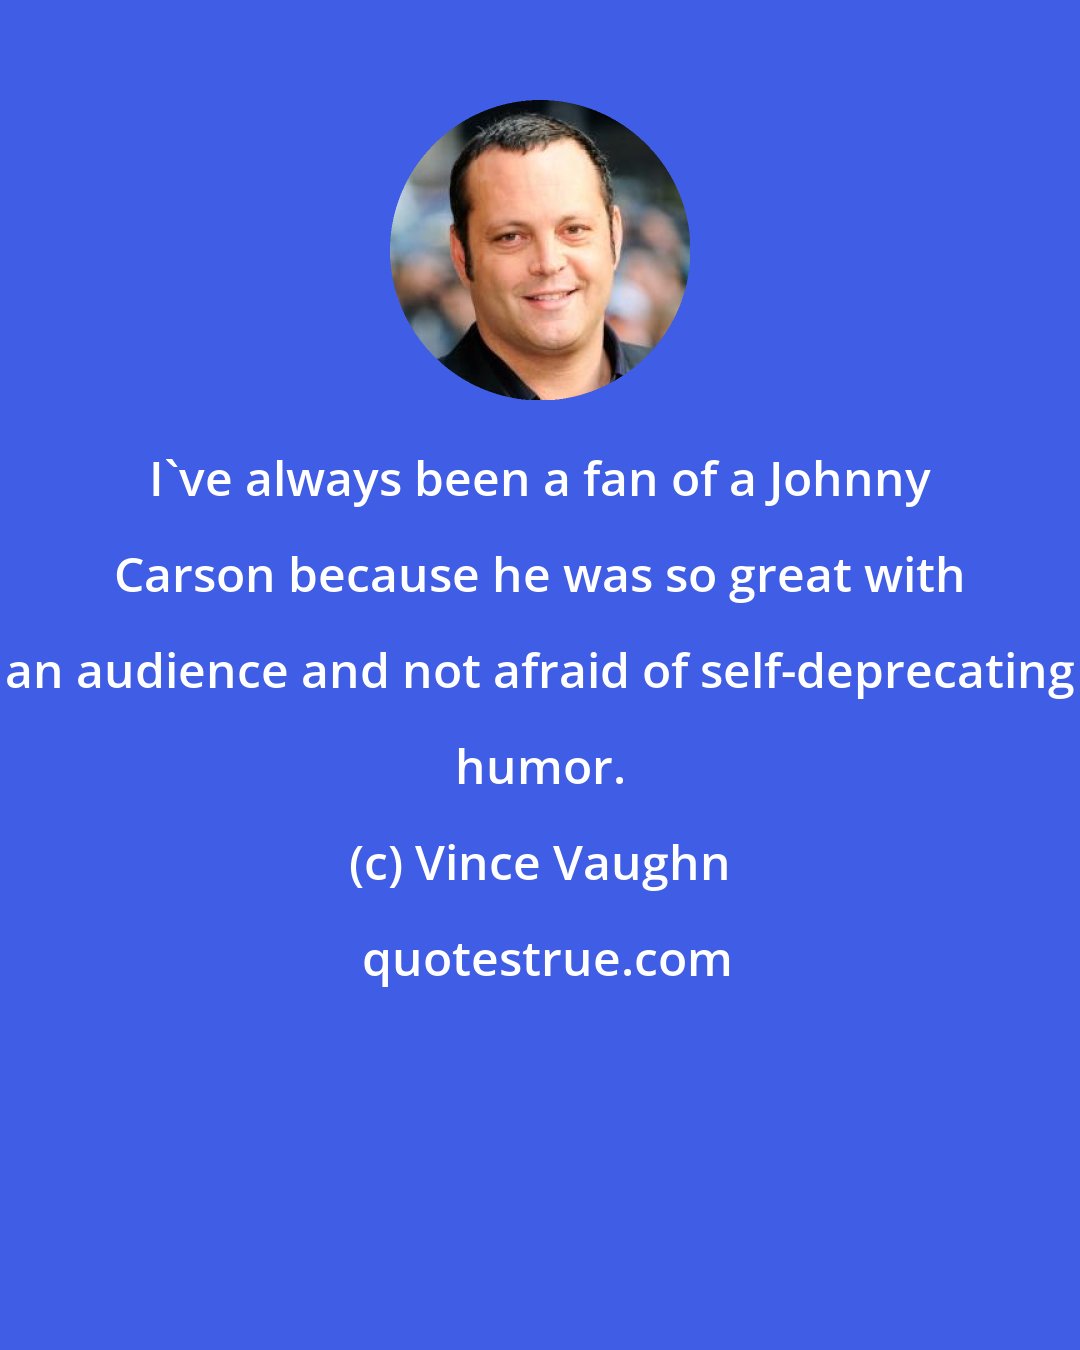 Vince Vaughn: I've always been a fan of a Johnny Carson because he was so great with an audience and not afraid of self-deprecating humor.